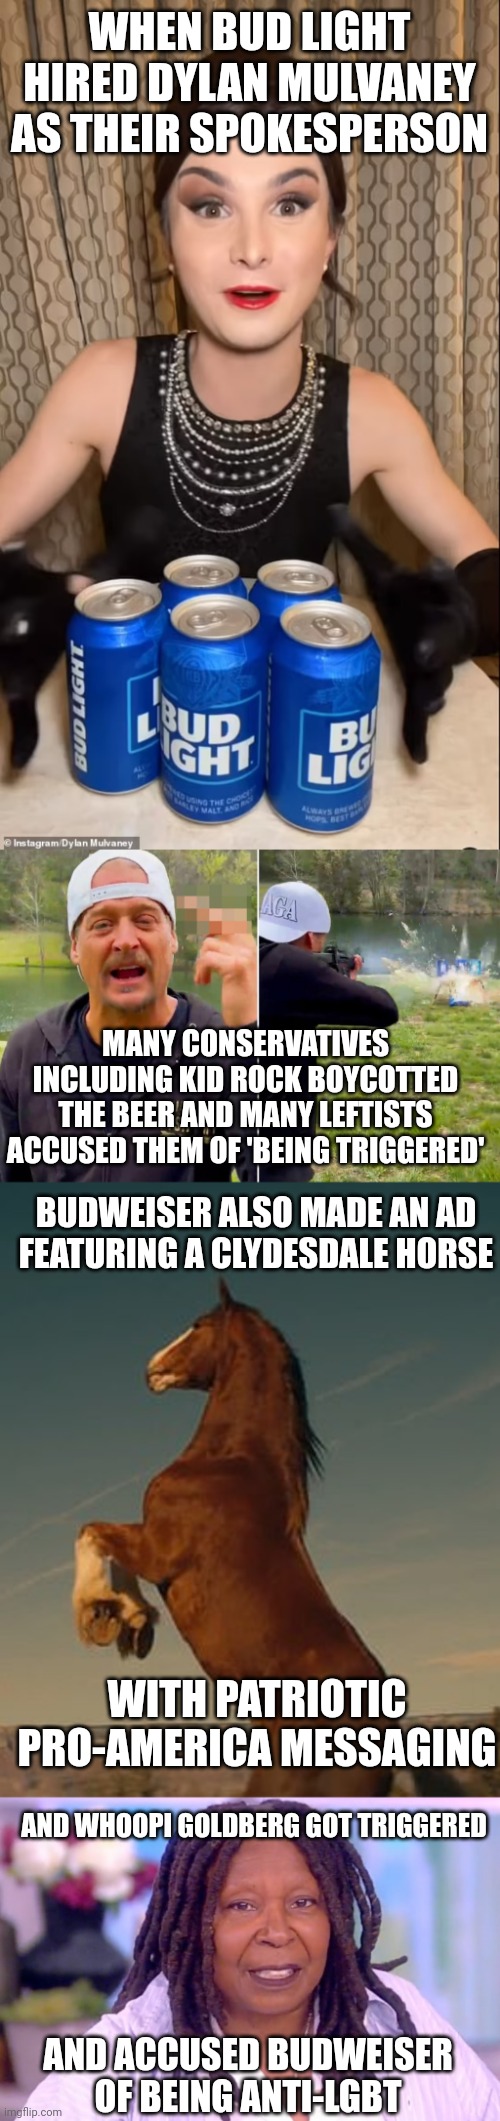 You accuse conservatives of being triggered over a bud light ad but a leftist recently got triggered by a Budweiser ad | WHEN BUD LIGHT HIRED DYLAN MULVANEY AS THEIR SPOKESPERSON; MANY CONSERVATIVES INCLUDING KID ROCK BOYCOTTED THE BEER AND MANY LEFTISTS ACCUSED THEM OF 'BEING TRIGGERED'; BUDWEISER ALSO MADE AN AD FEATURING A CLYDESDALE HORSE; WITH PATRIOTIC PRO-AMERICA MESSAGING; AND WHOOPI GOLDBERG GOT TRIGGERED; AND ACCUSED BUDWEISER OF BEING ANTI-LGBT | image tagged in whoopi goldberg,kid rock,bud light,budweiser,liberal hypocrisy,stupid liberals | made w/ Imgflip meme maker